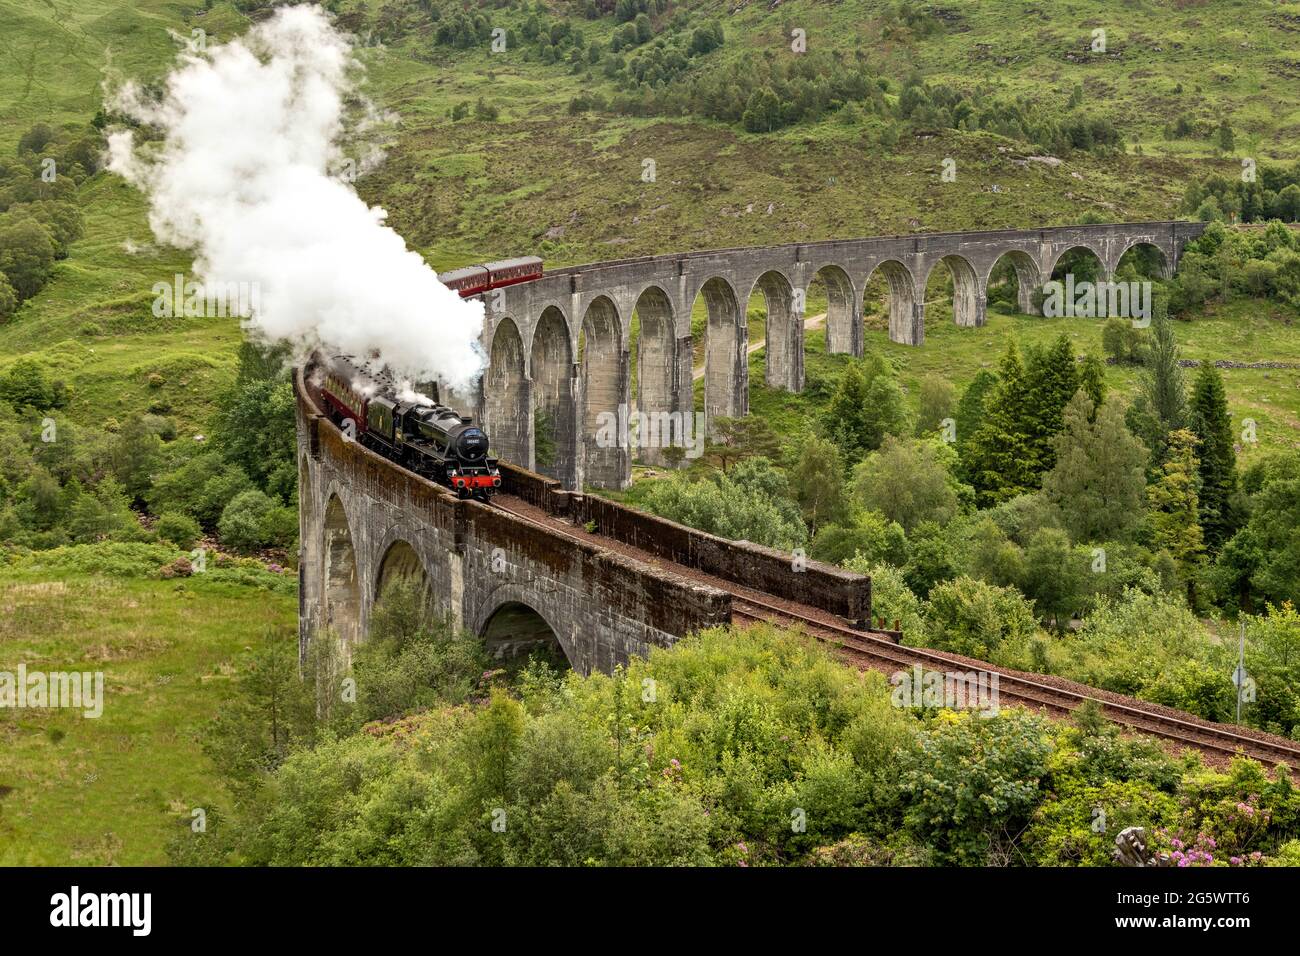 JACOBITE STEAM TRAIN GLENFINNAN SCOTLAND THE TRAIN AND SMOKE IN EARLY SUMMER Stock Photo